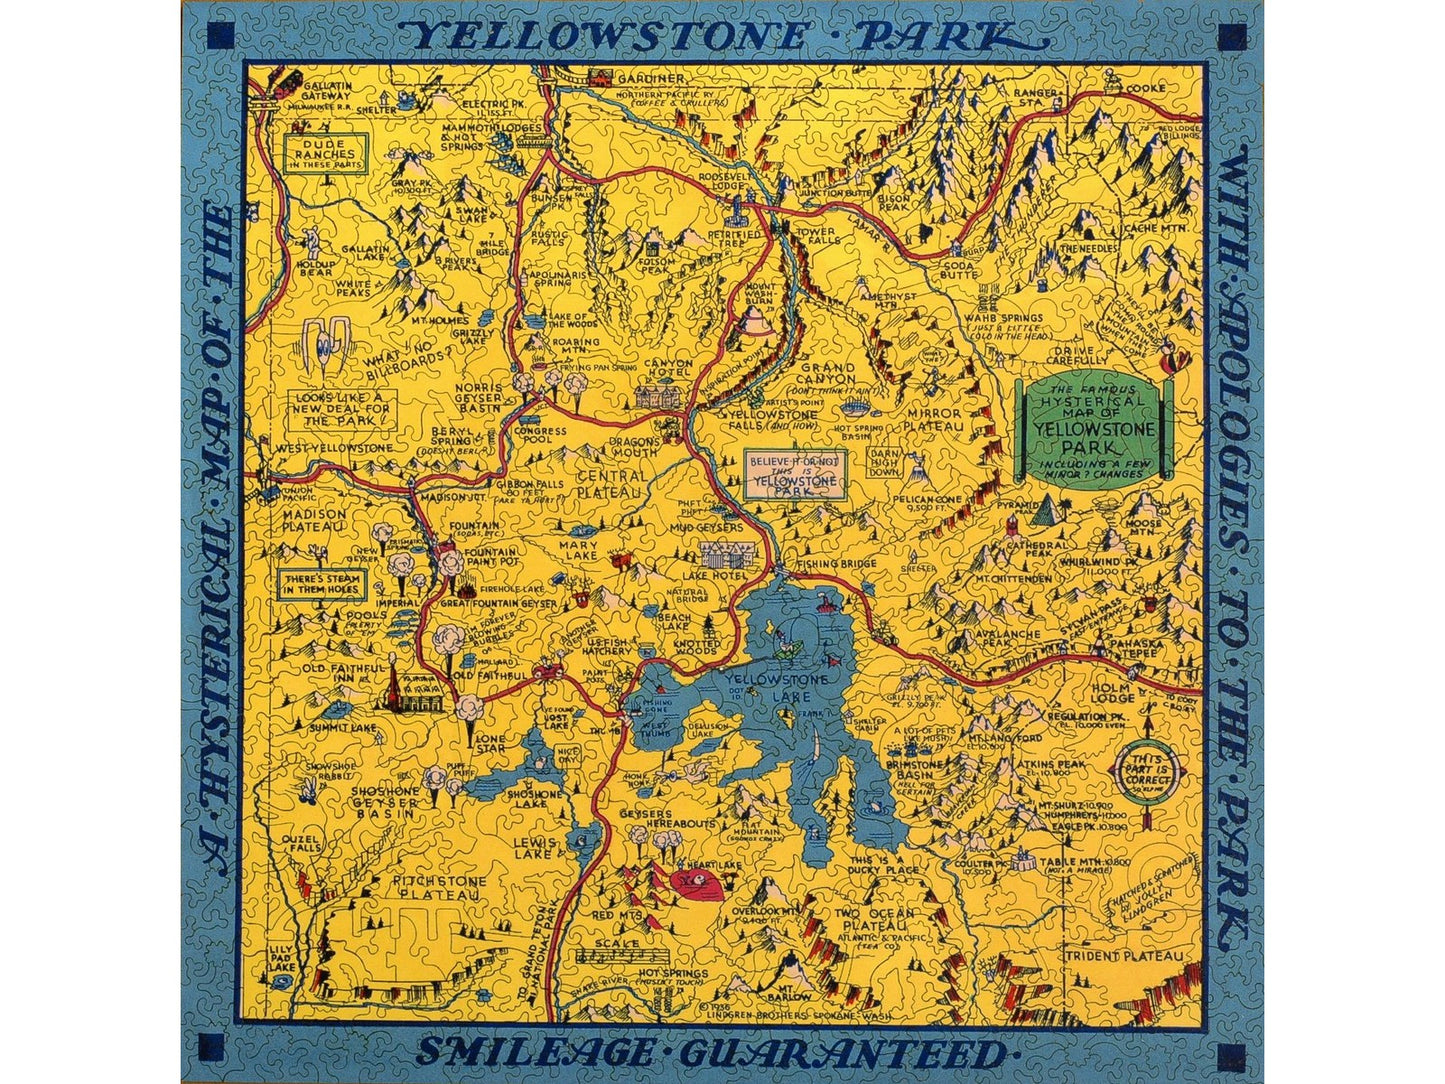 The front of the puzzle, Hysterical Map of Yellowstone Park, which shows a yellow map of yellowstone park, with humorous drawings an captions, with a blue border.